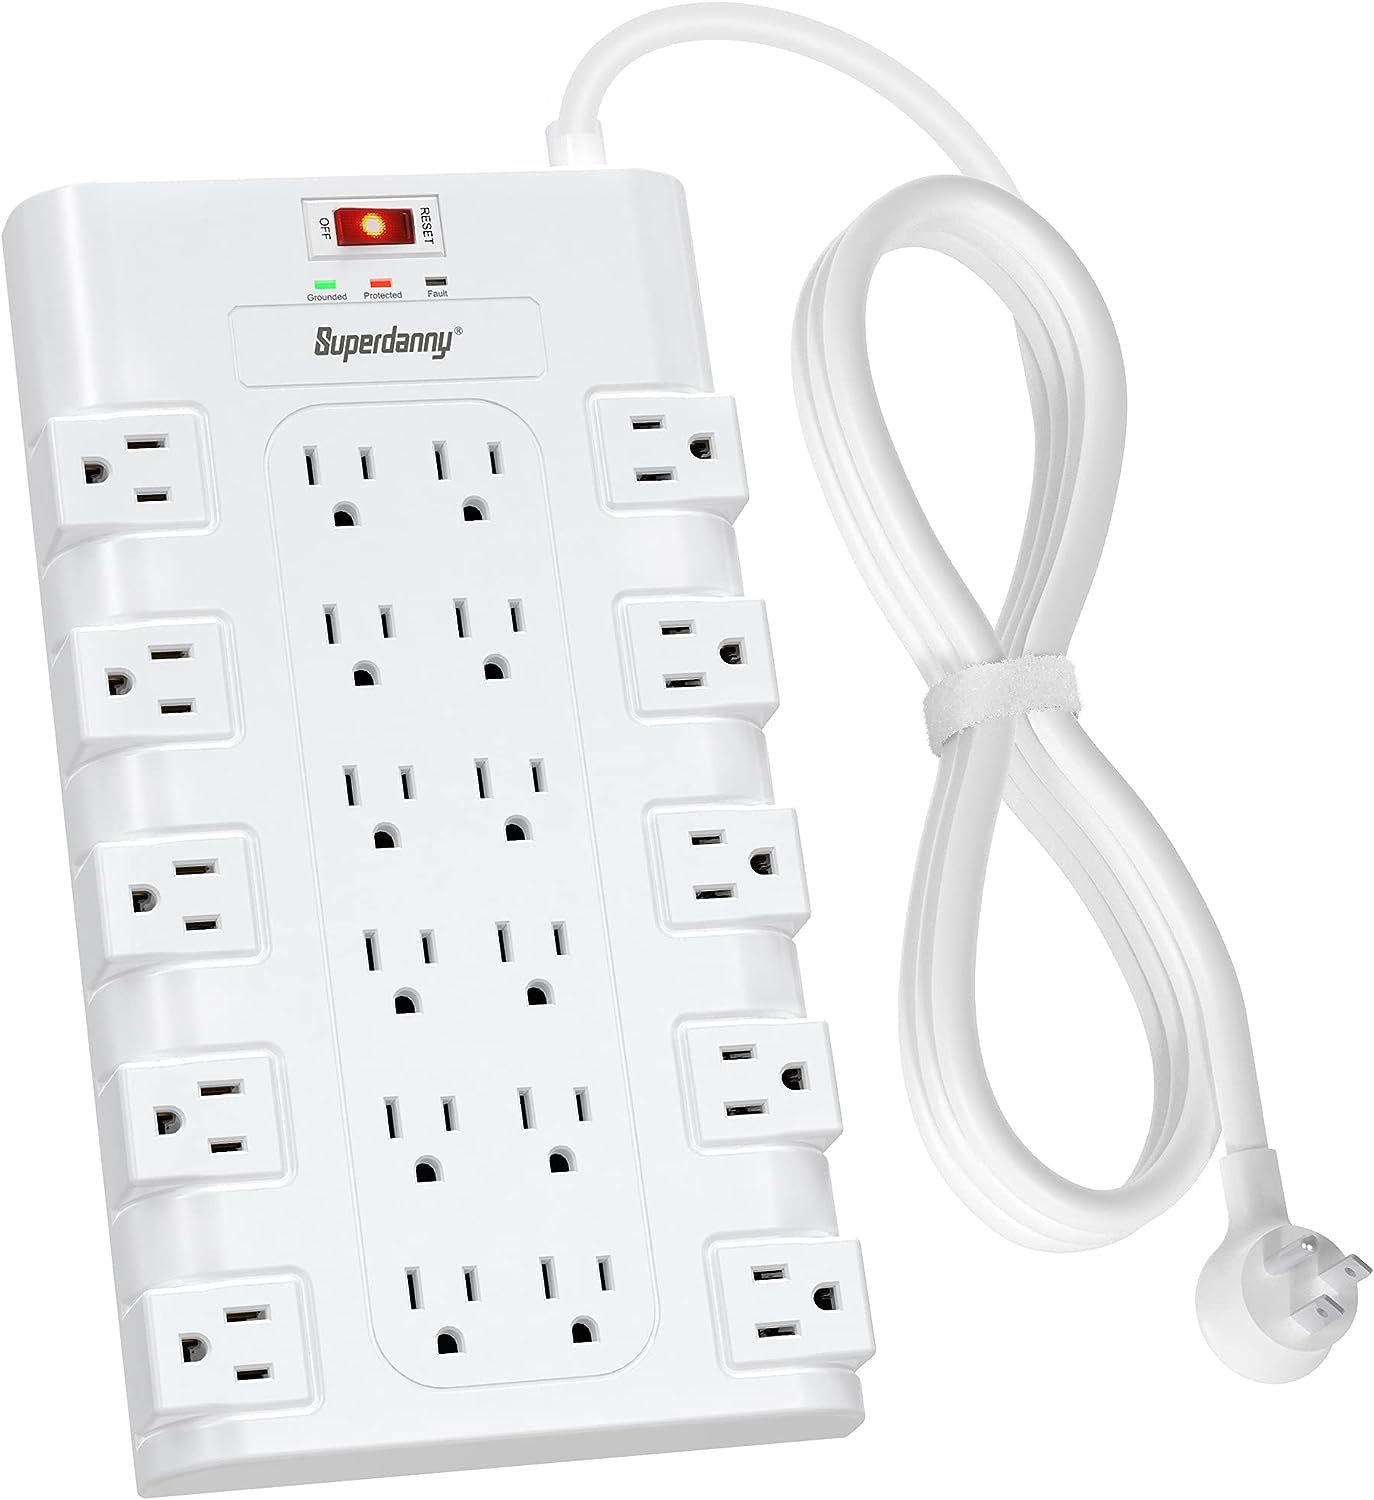 SUPERDANNY Power Strip Surge Protector Multiple Outlets 1875W/15A 6.5Ft  Flat Plug Heavy Duty Extension Cord